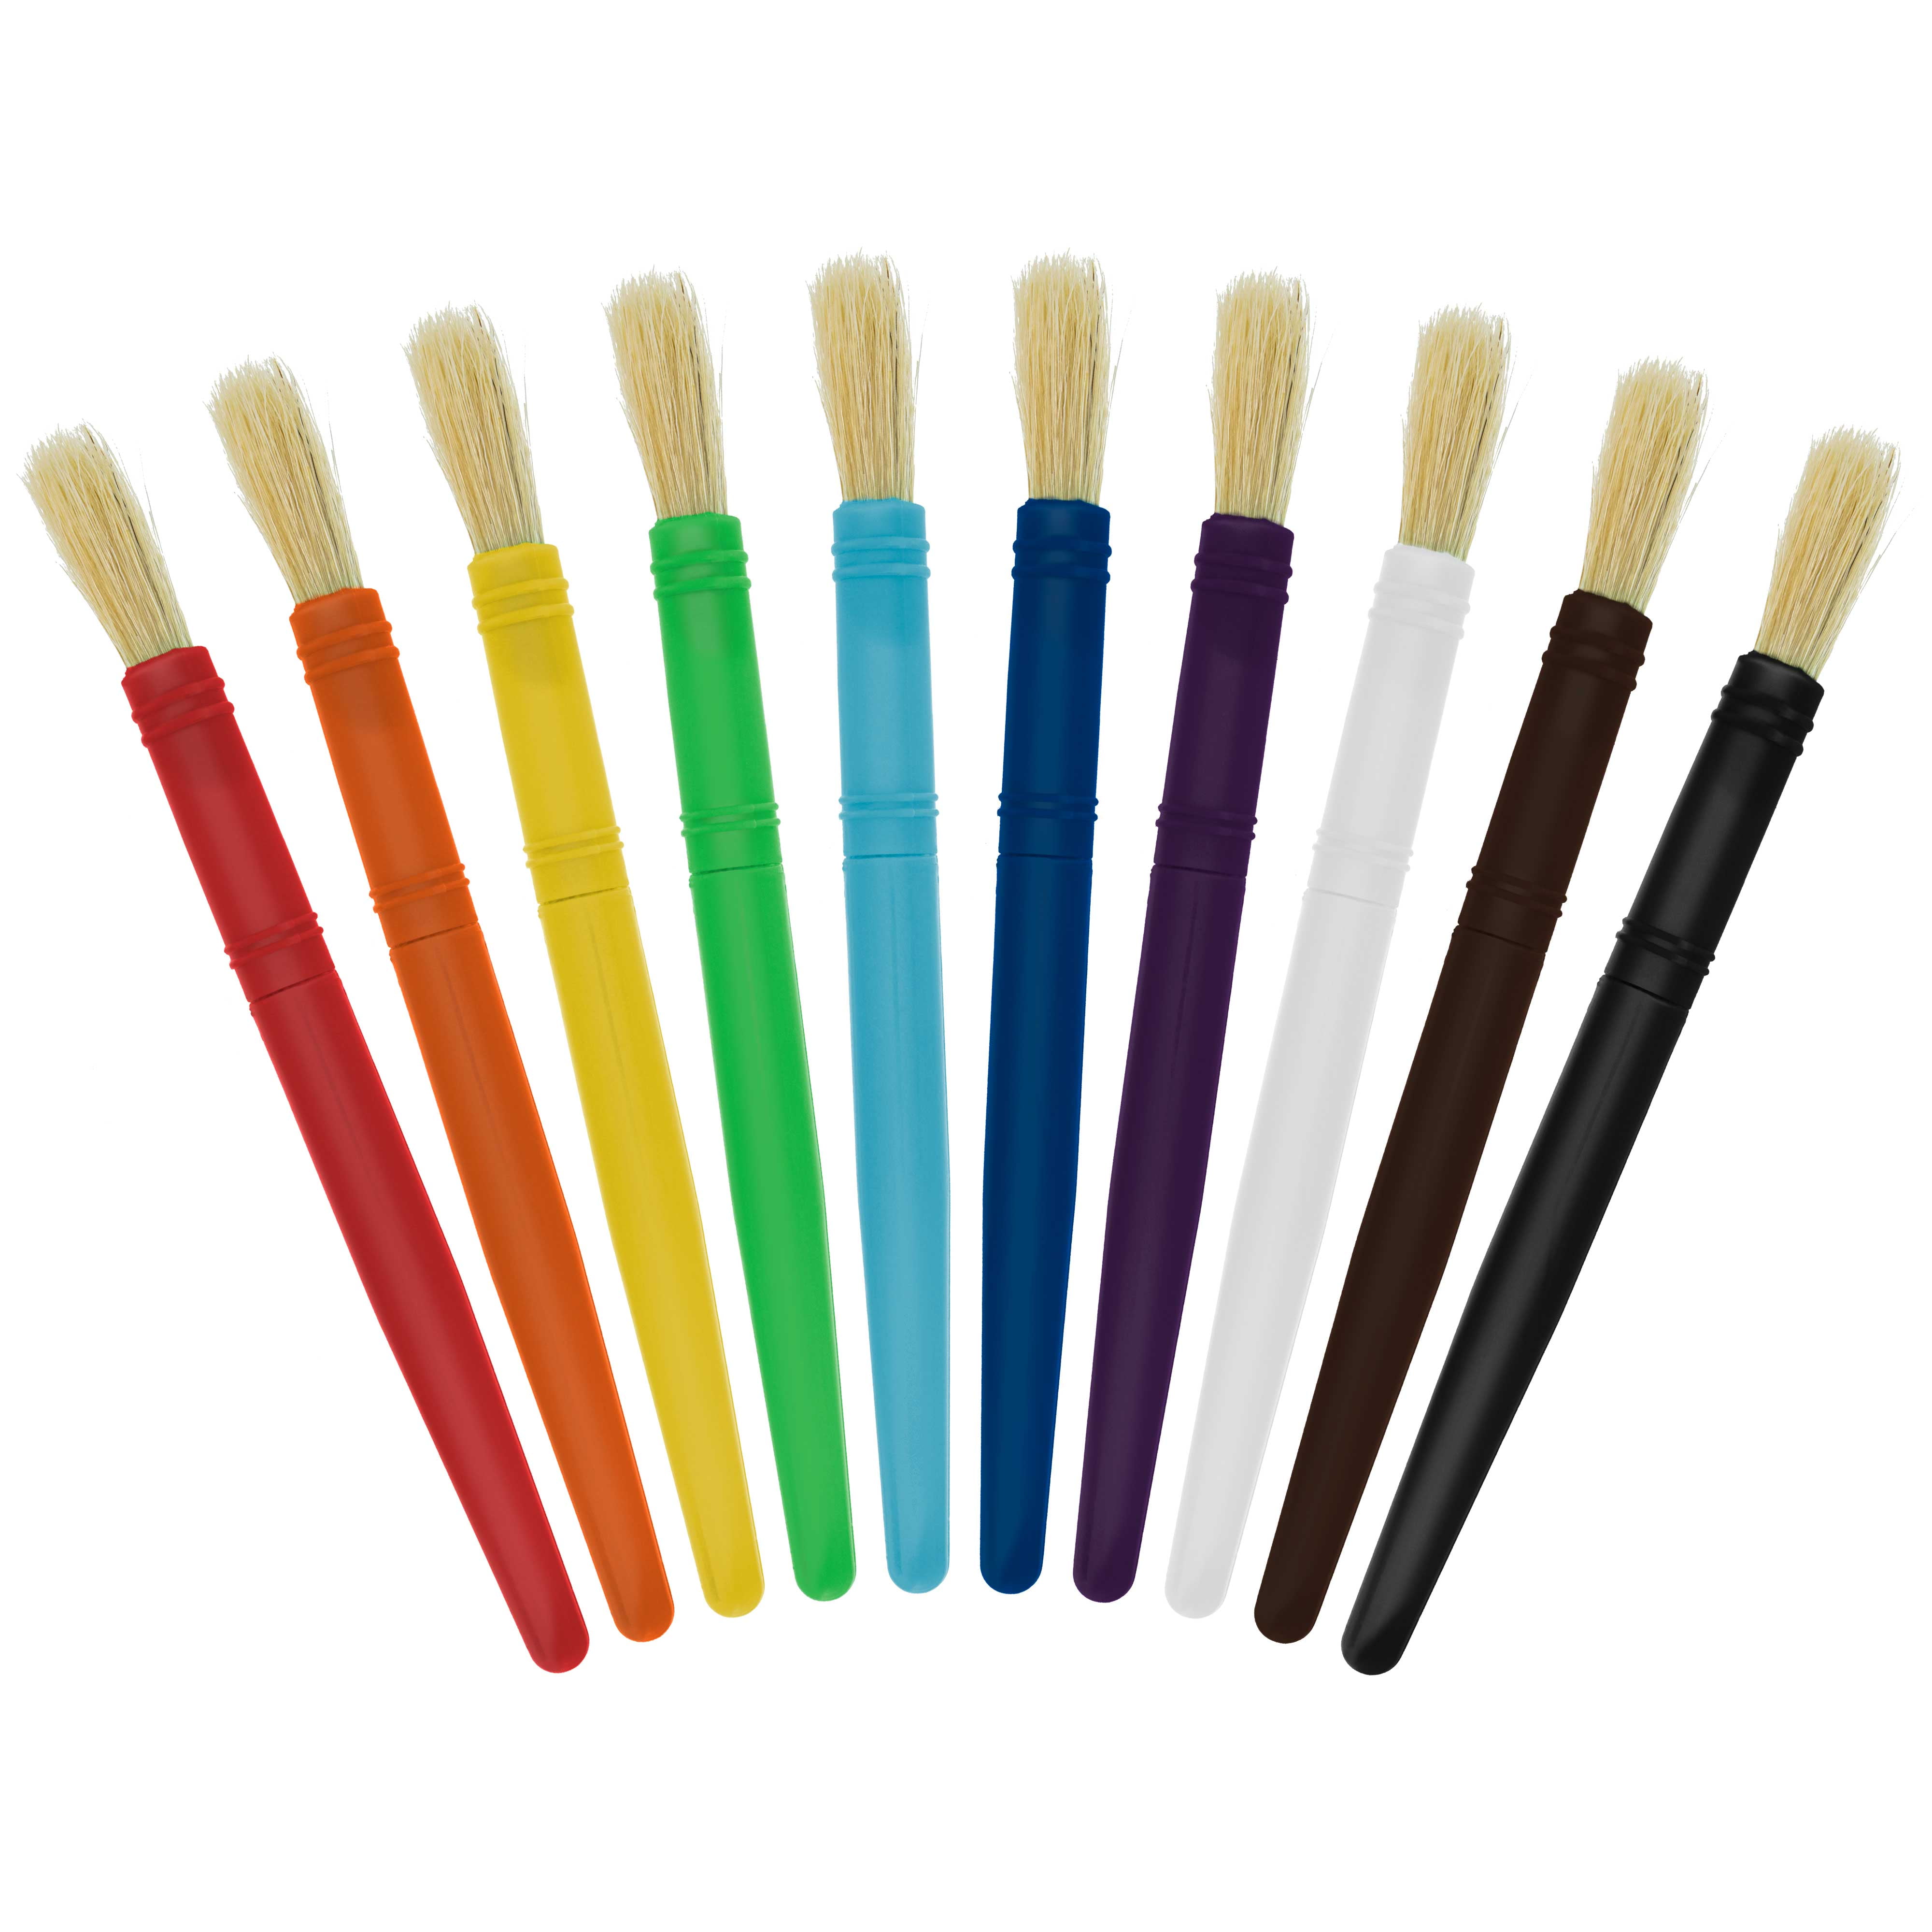 US Art Supply 10 Piece Large Round Chubby Hog Bristle Children's Tempera and Artist Paint Brushes